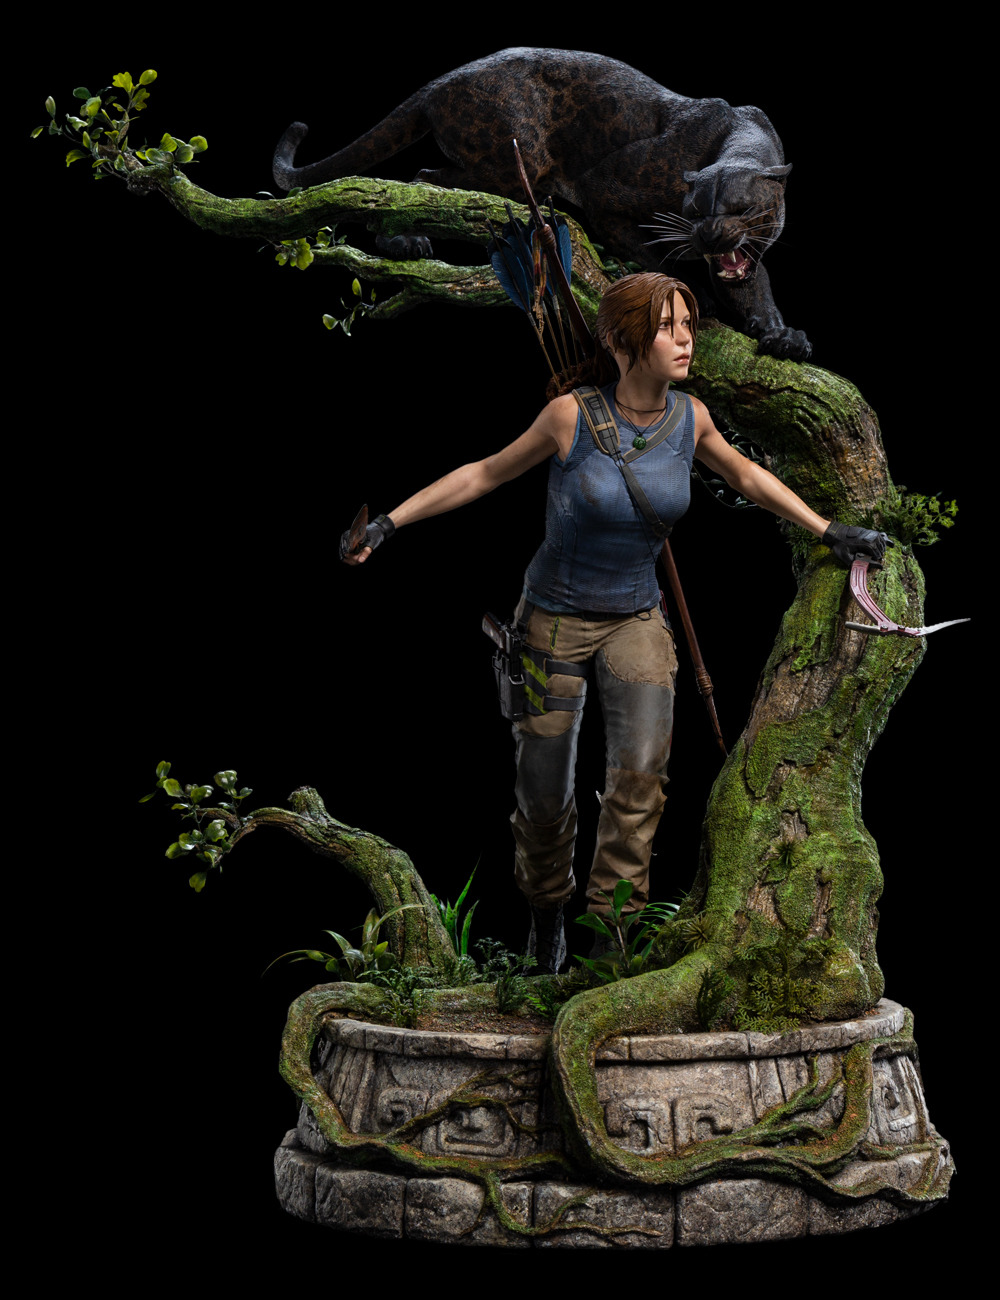 The Rise of Tomb Raider -Knock down The statue- 